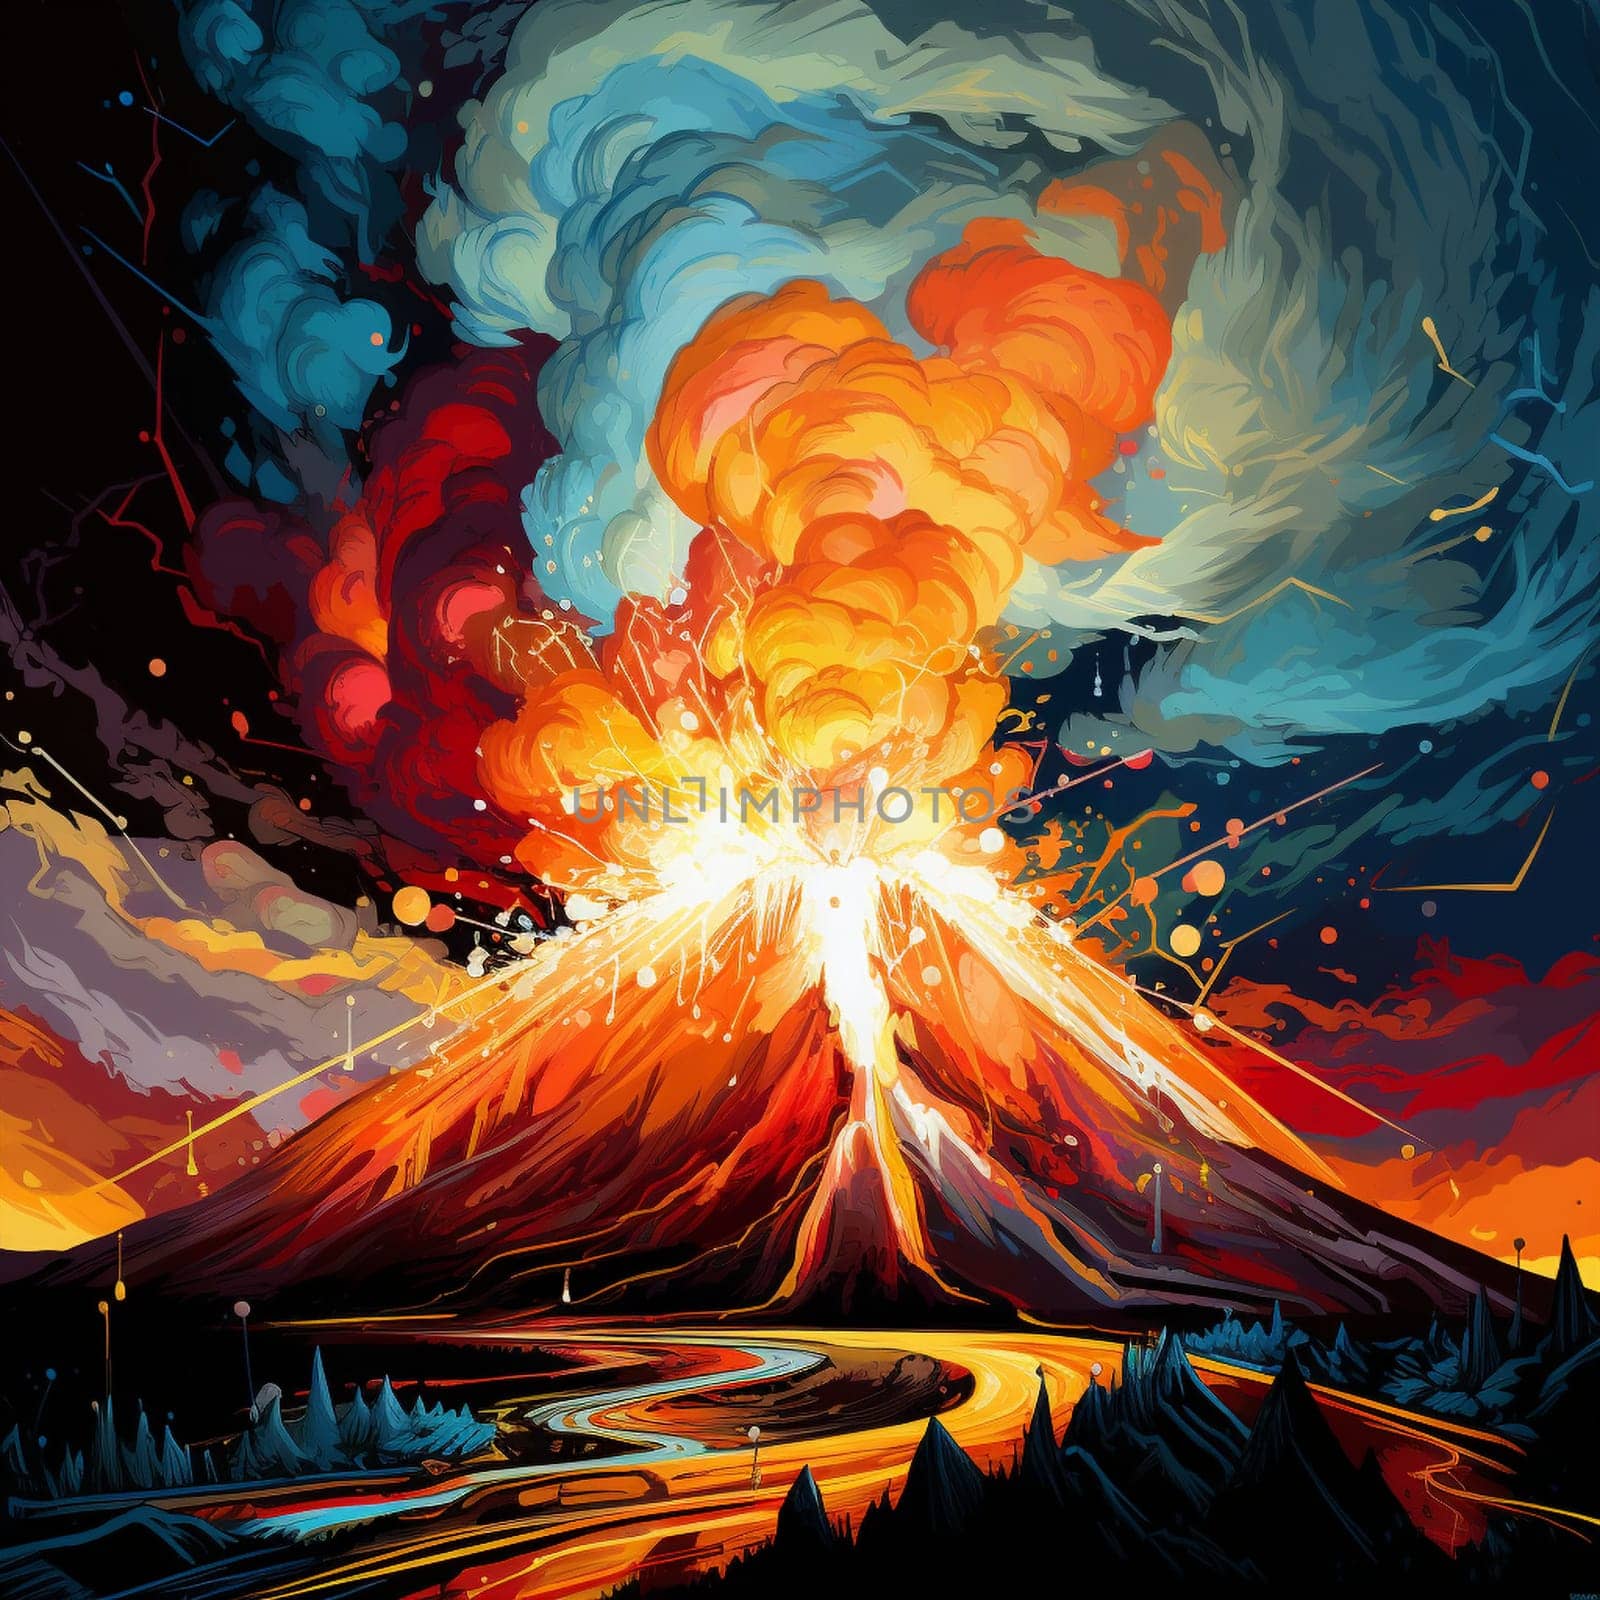 Experience the captivating power of nature with this vibrant and dynamic artwork featuring a flaming tornado erupting from a volcano. This stunning image is suitable for microstock sites and will surely catch the eye of viewers looking for bold and captivating visuals.